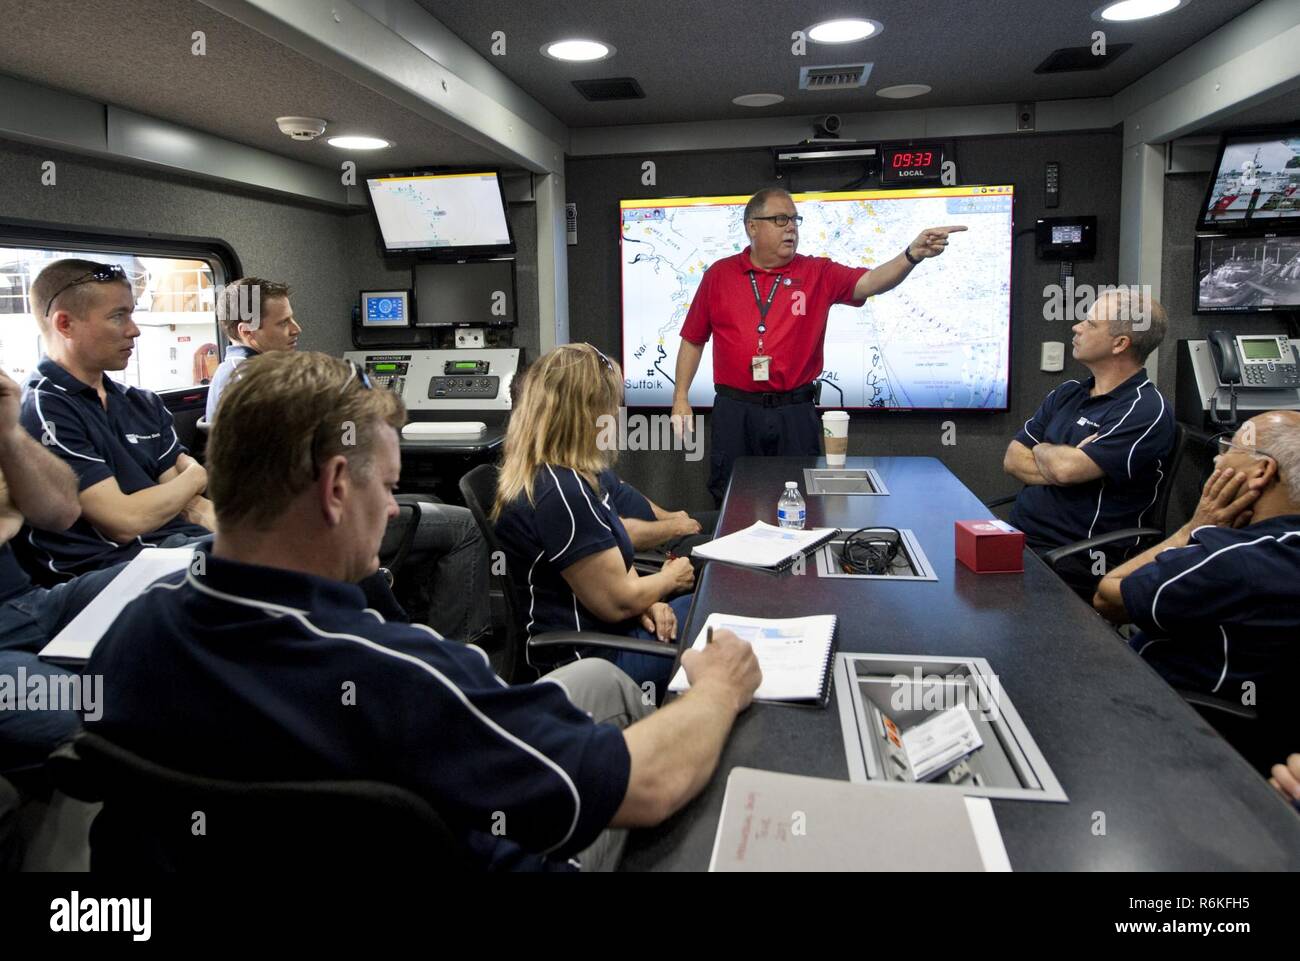 William Burket, director of emergency operations at the Virginia Port Authority in Norfolk, Virginia, explains the capabilities of the Port Authority Command 1 (PAC-1) to students from Queensland University of Technology in Brisbane, Queensland, Australia during their tour of Coast Guard Sector Hampton Roads in Portsmouth, Virginia, May 25, 2017. Burket described how the Coast Guard utilizes PAC-1 during interagency response operations. Stock Photo